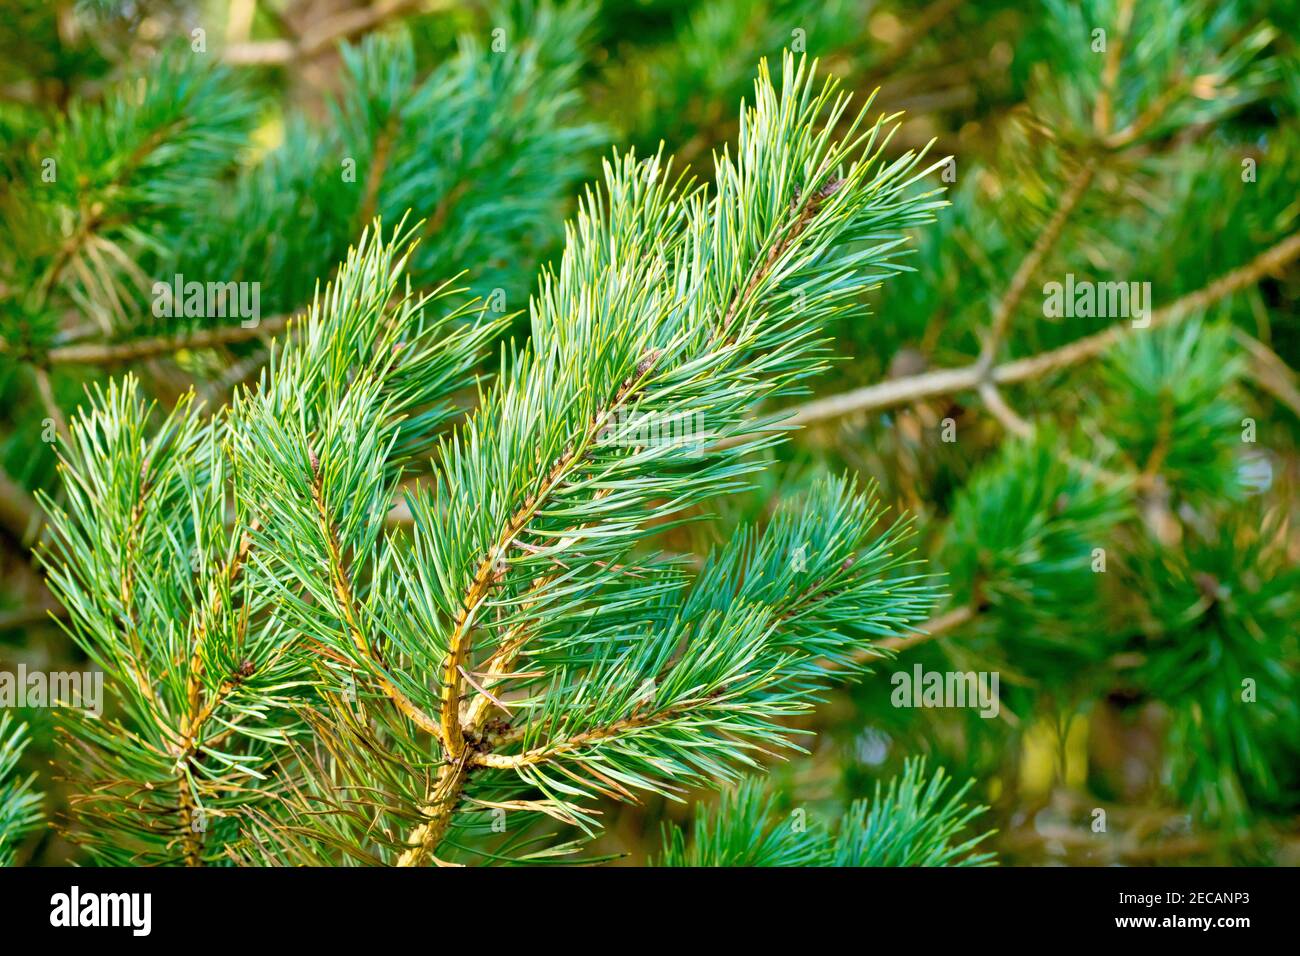 Scots Pine (pinus sylvestris), close up of a branch of the tree showing the golden yellow colour of the bark and the green needles. Stock Photo